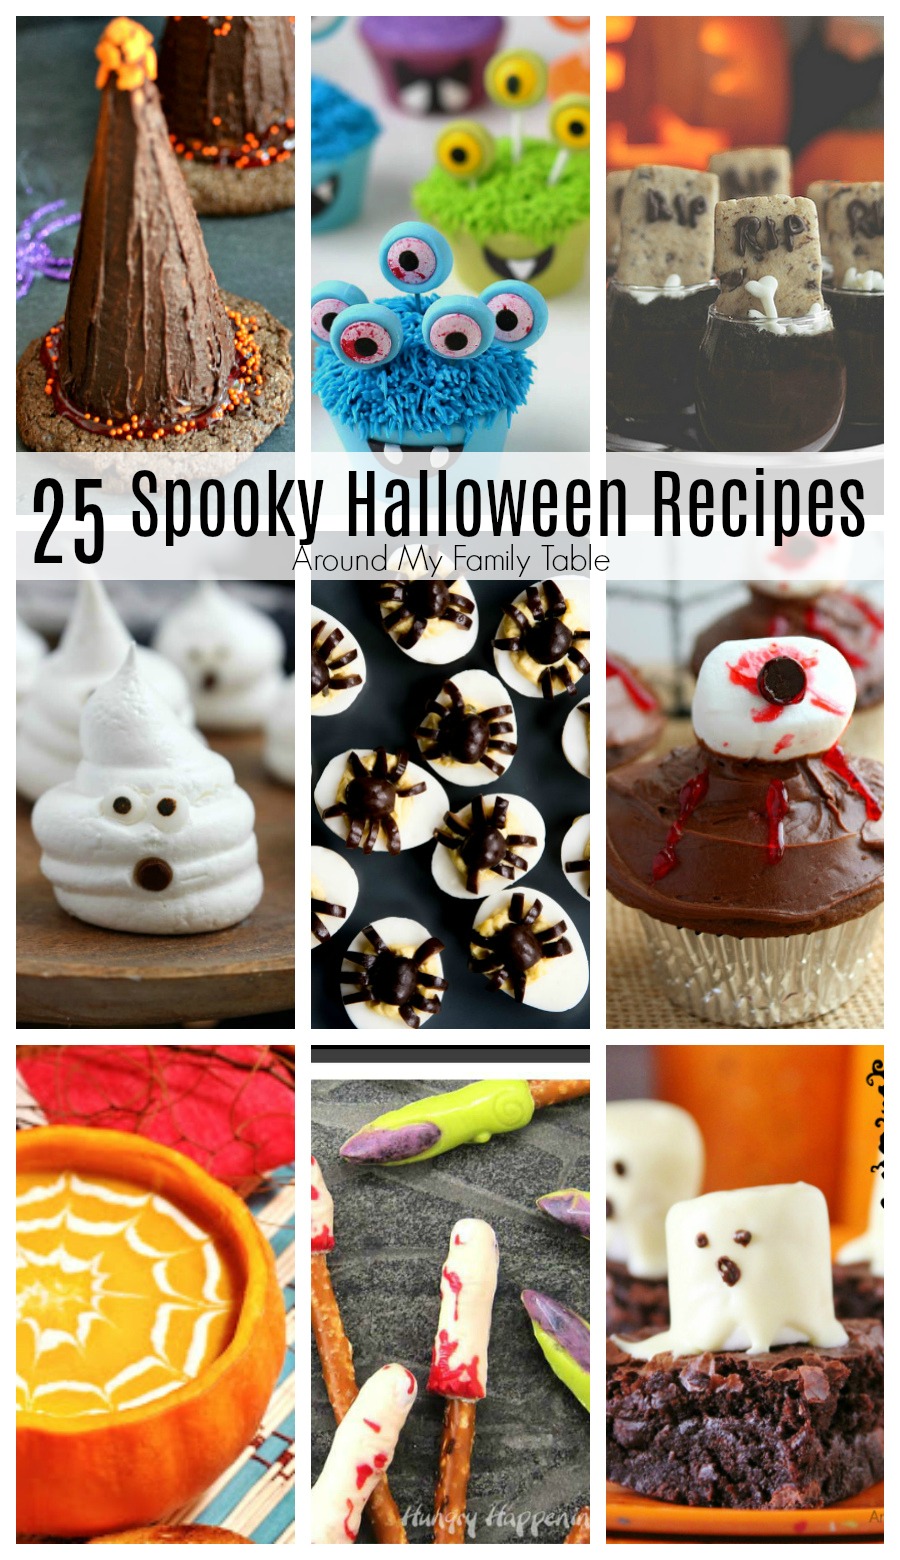 If you are looking for a little inspiration for some Spooky Halloween Recipes, you’ve come to the right place. These 25 Spooky Halloween Recipes will be the perfect addition to any October party.